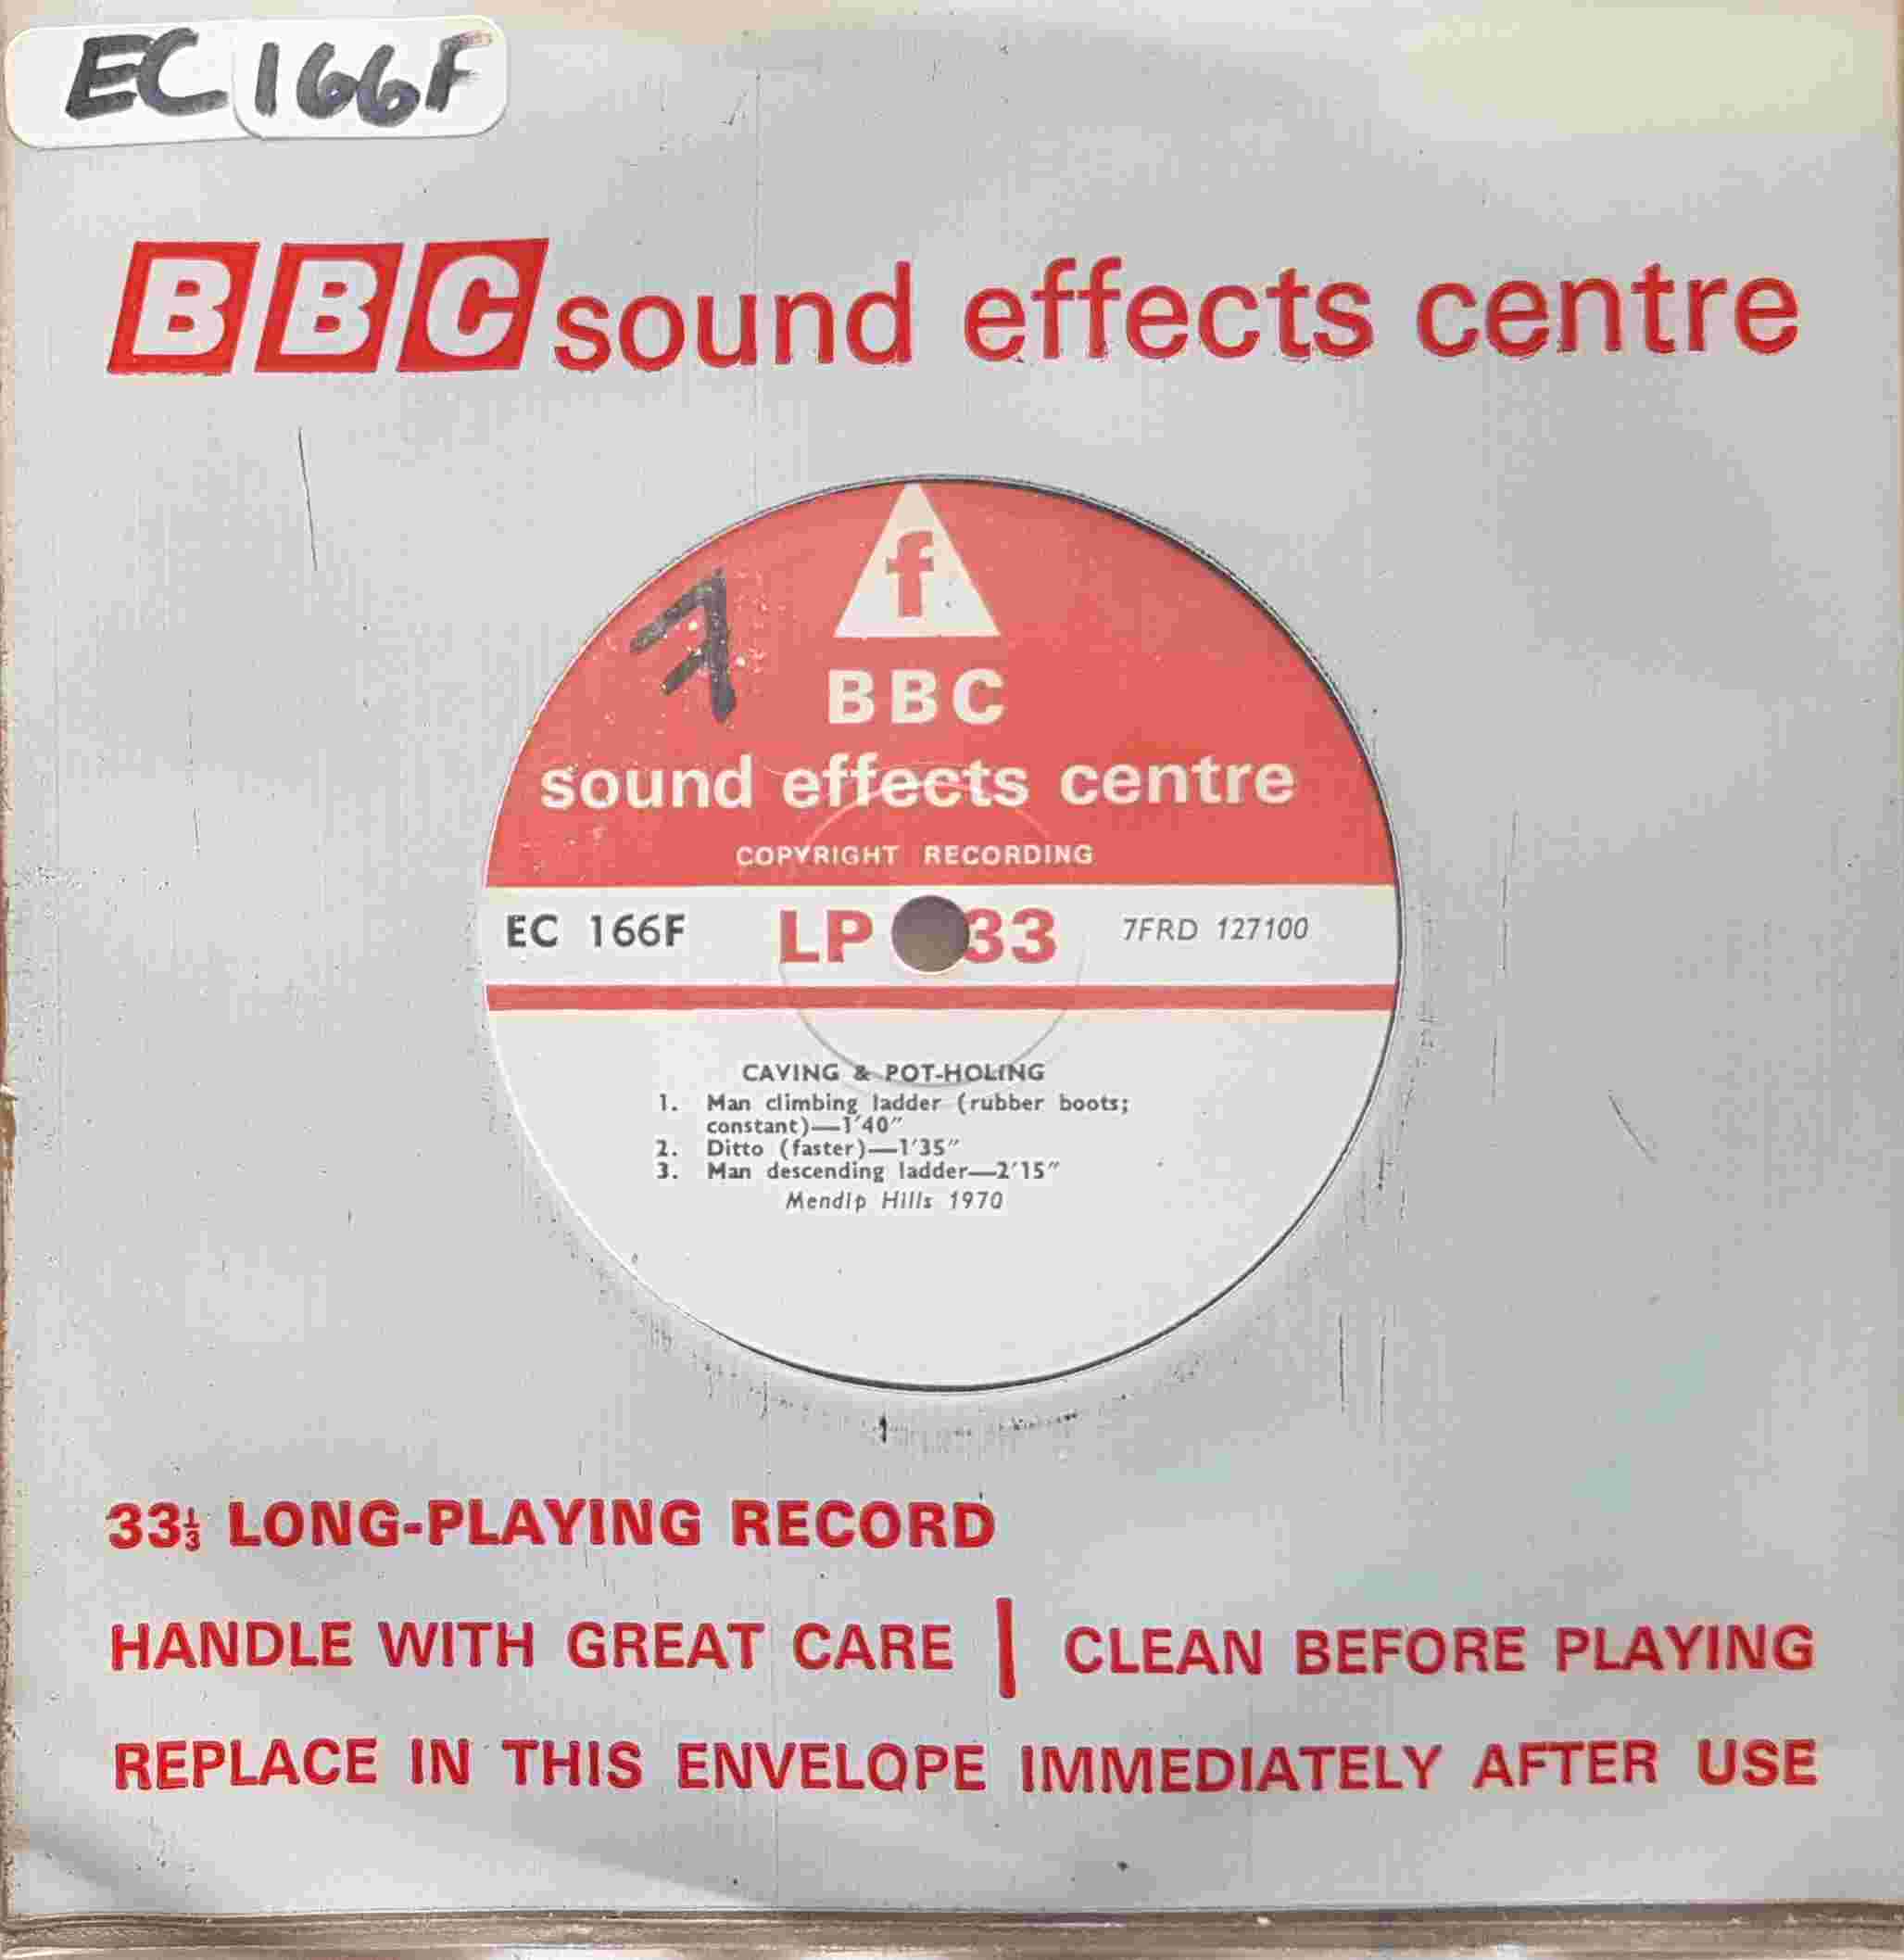 Picture of EC 166F Caving & pot-holing by artist Not registered from the BBC records and Tapes library